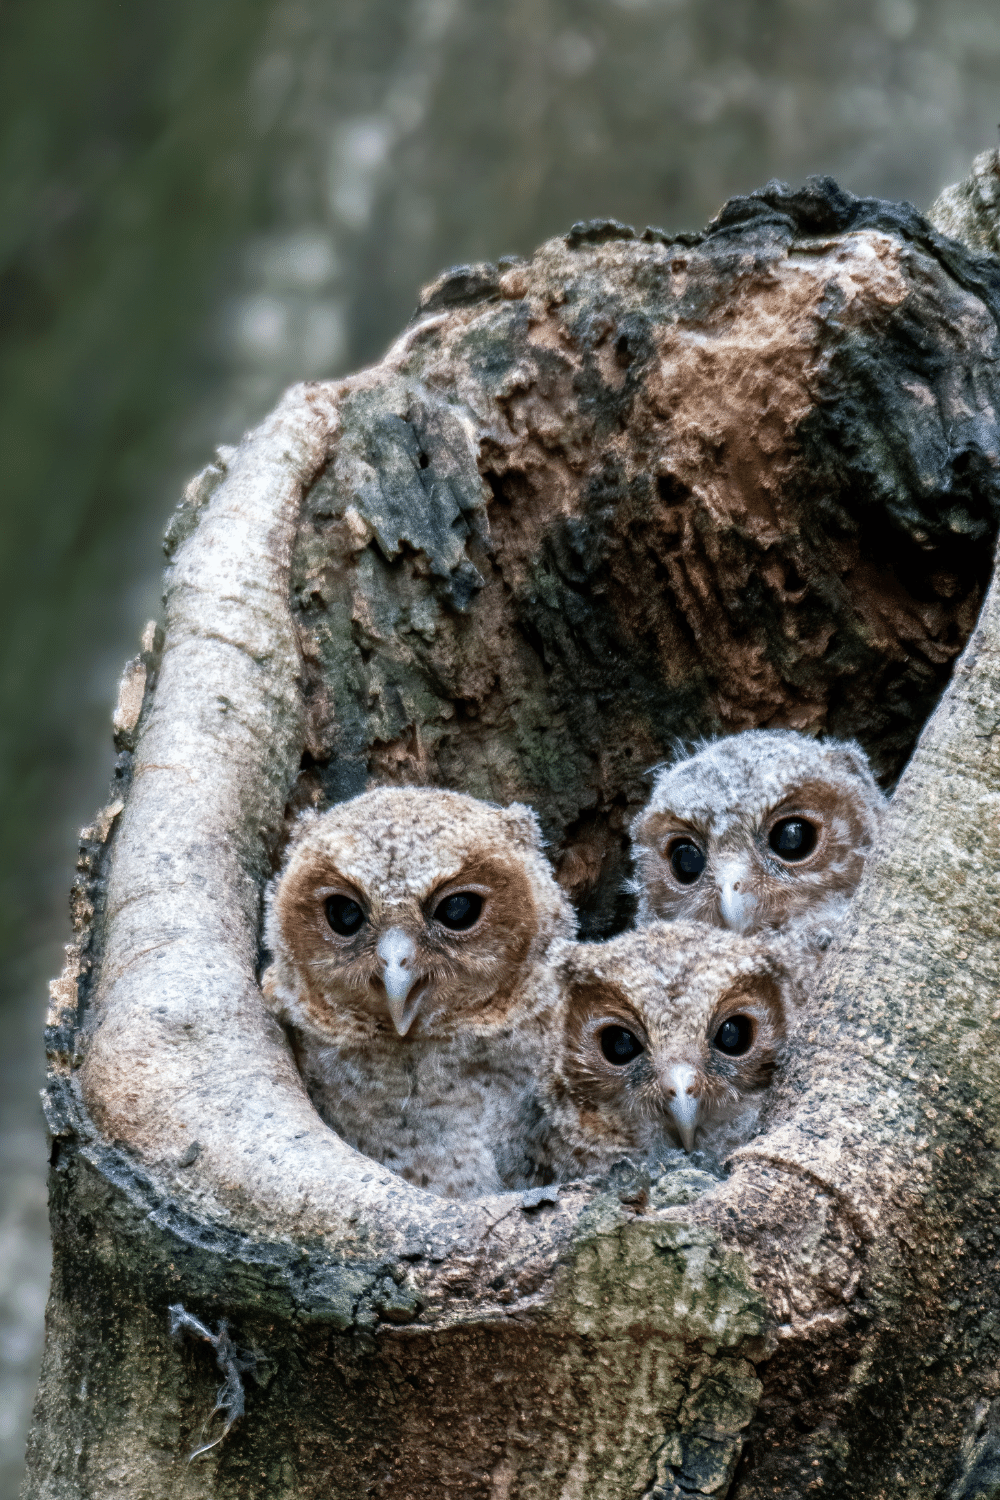 Finding An Owl’s Nest And Peering Into It